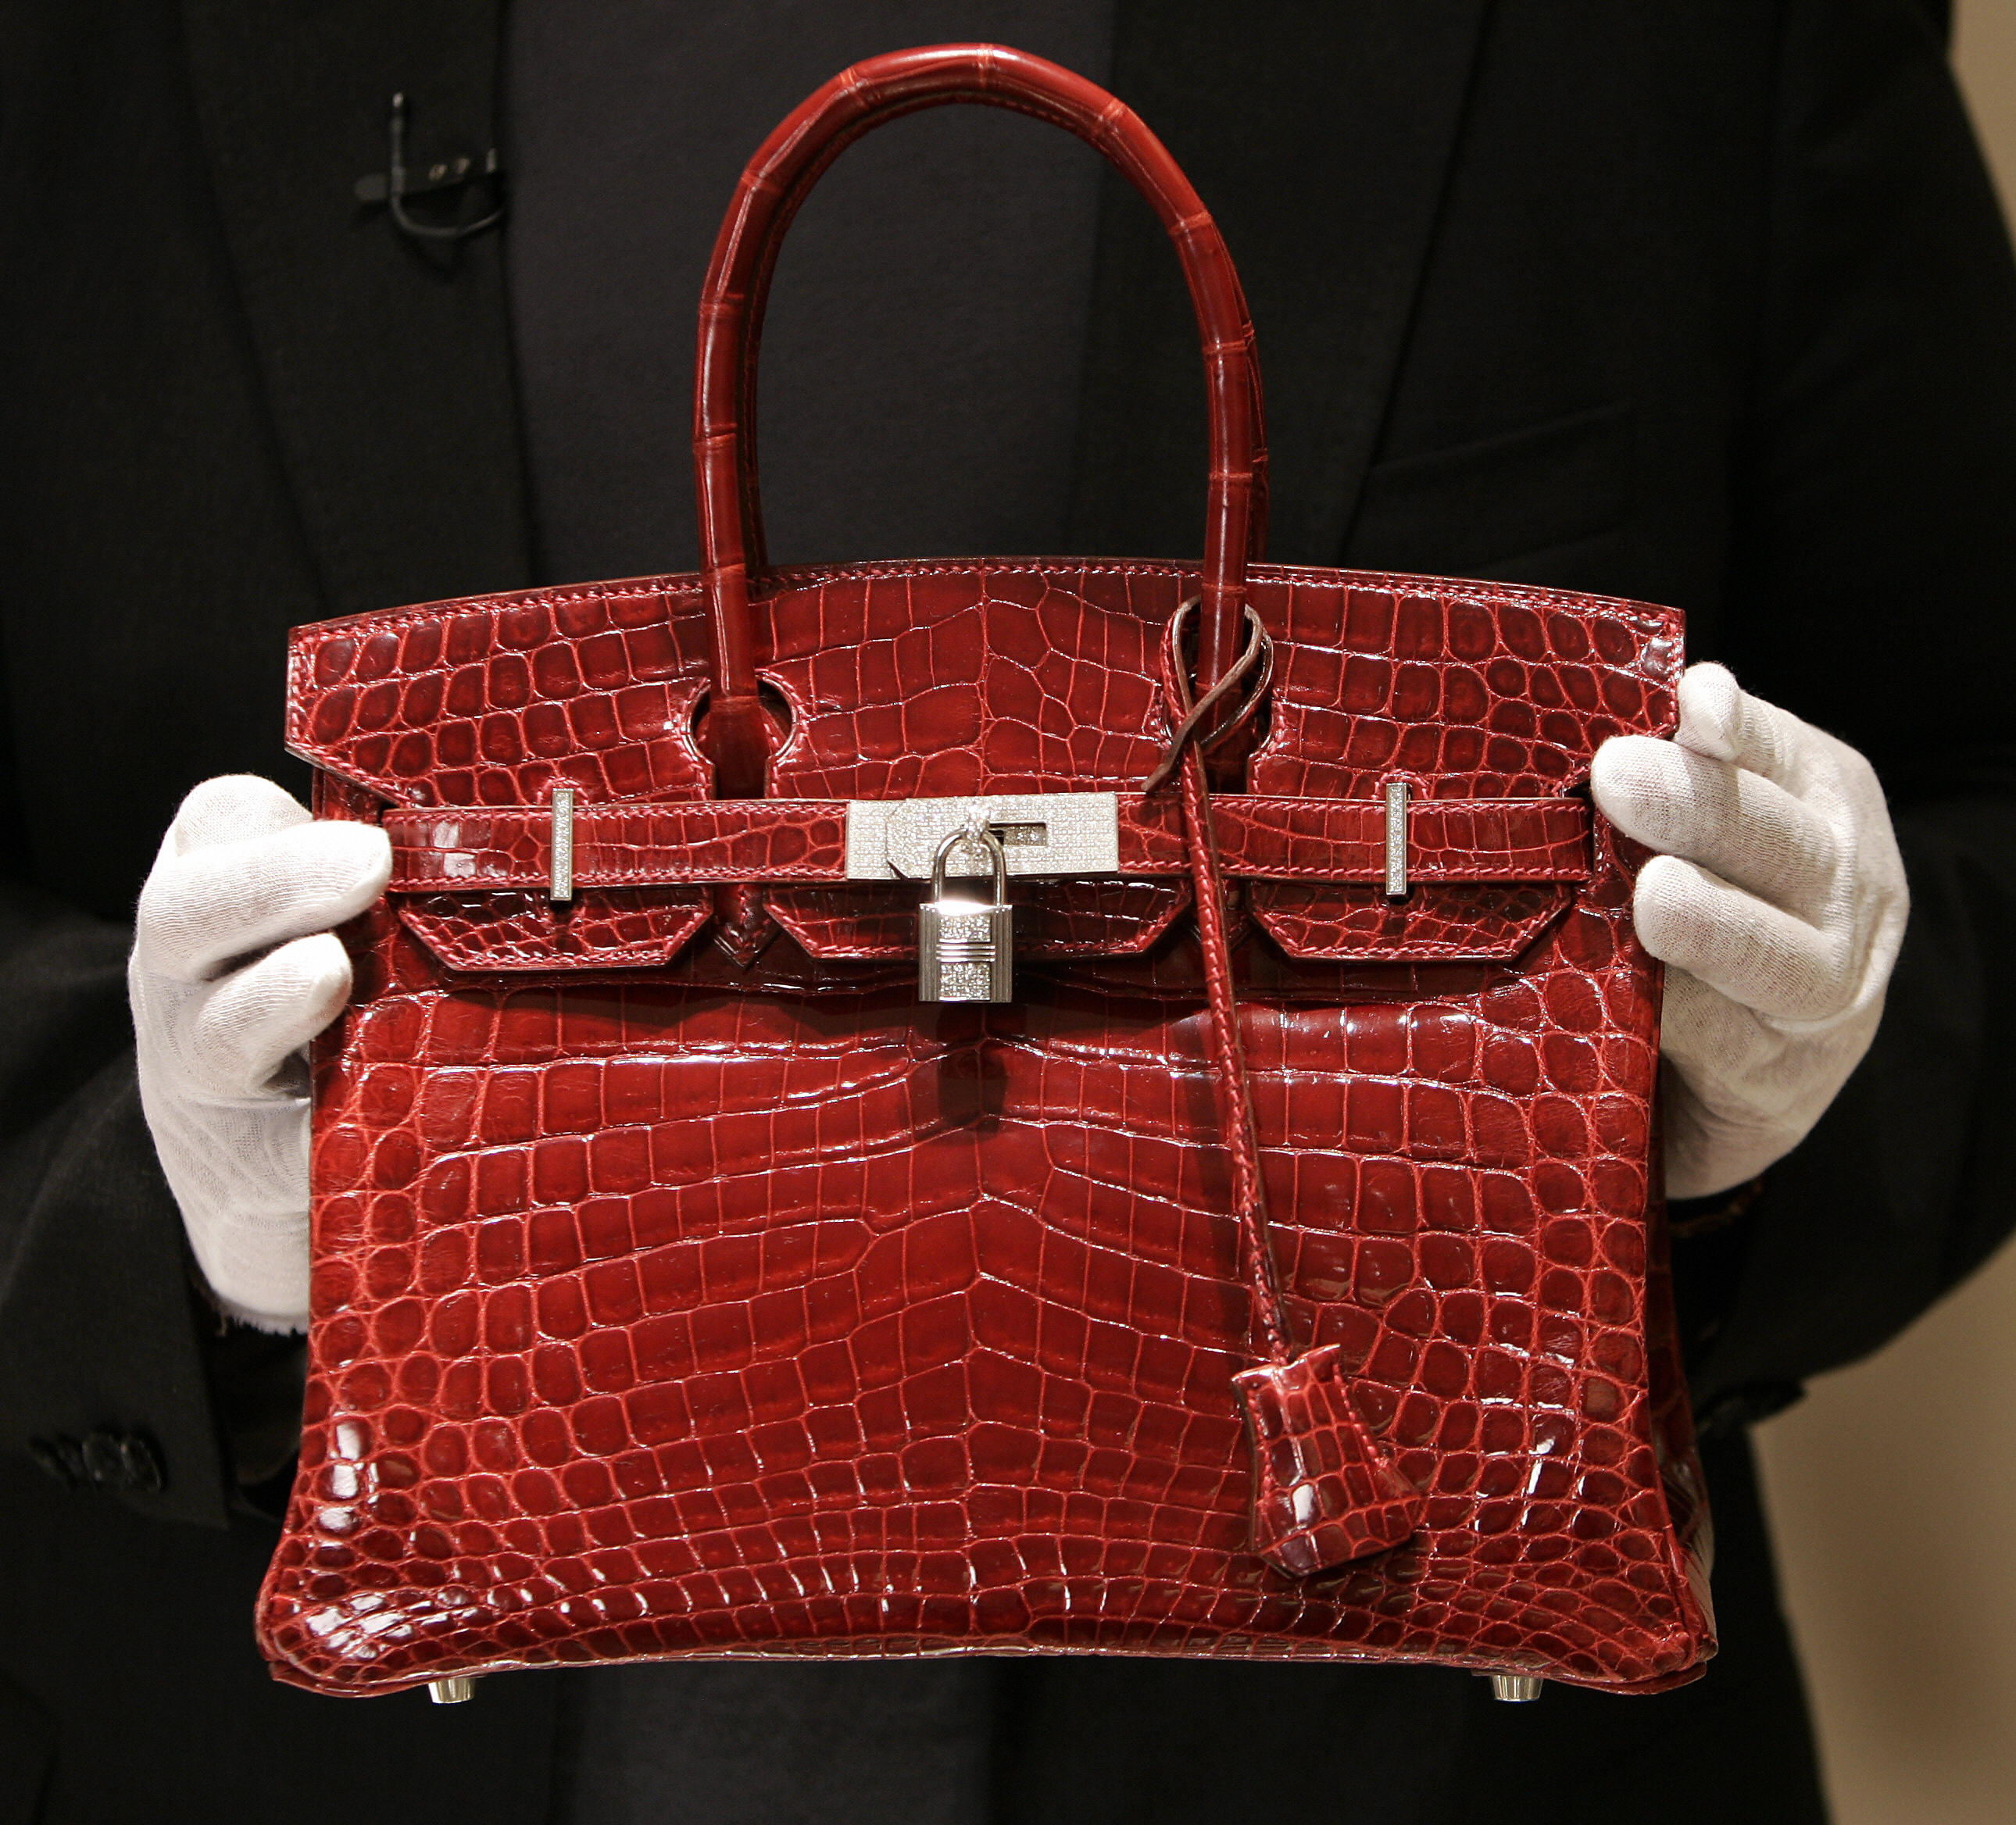 A employee holds a $129,000 crocodile Hermes Birkin Bag during a private opening for the new Hermes store on Wall Street in New York 21 June 2007. (Timothy A. Clary—AFP/Getty Images)